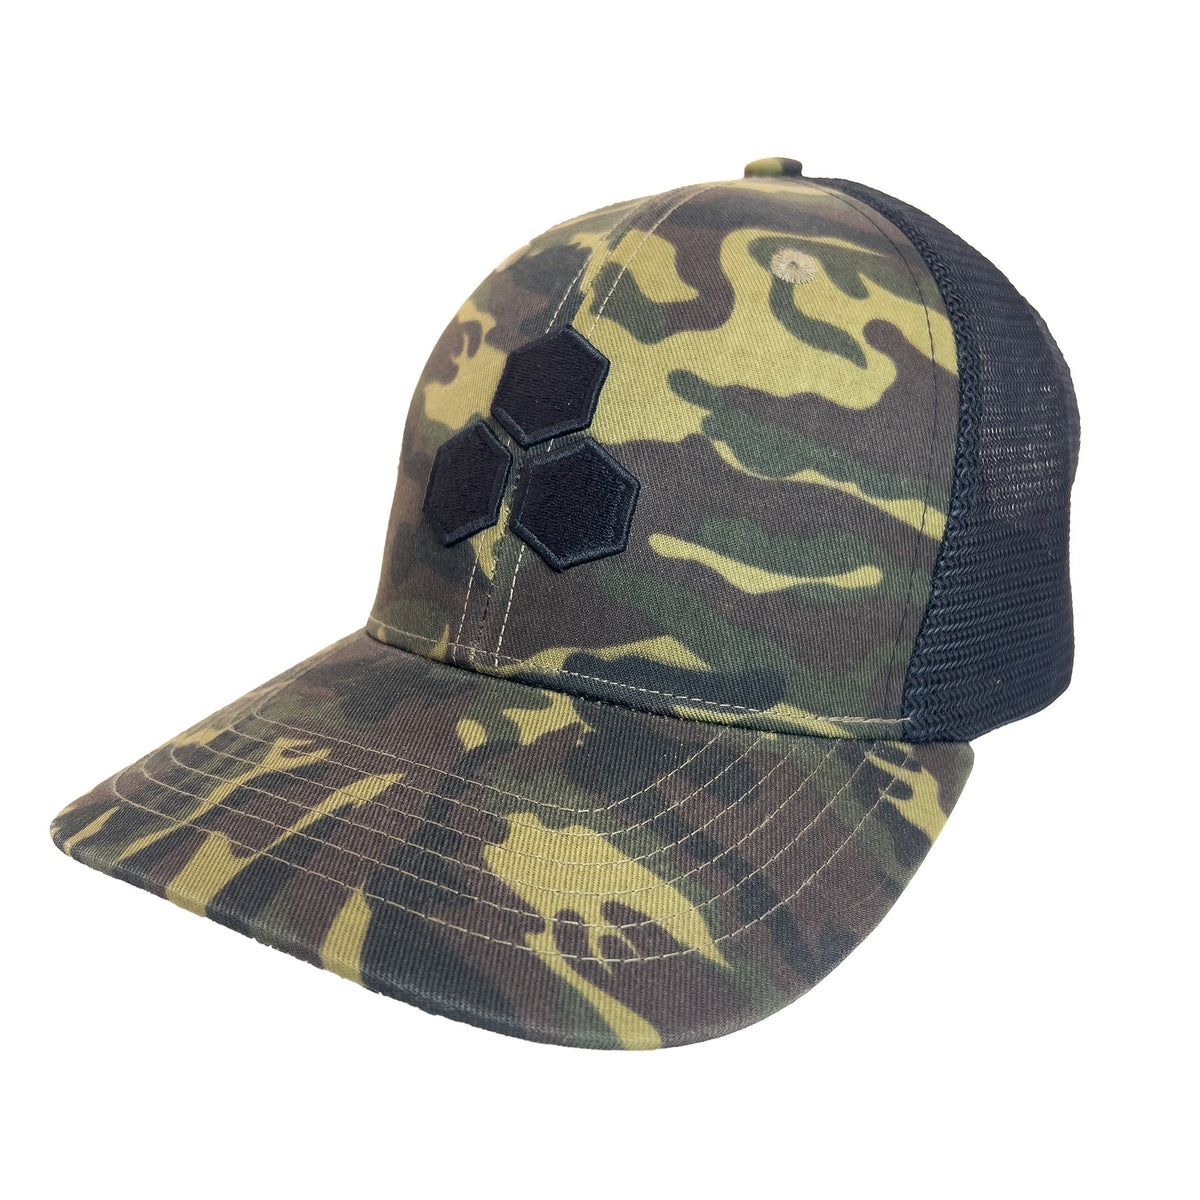 CHANNEL ISLAND - Country Camo Hat